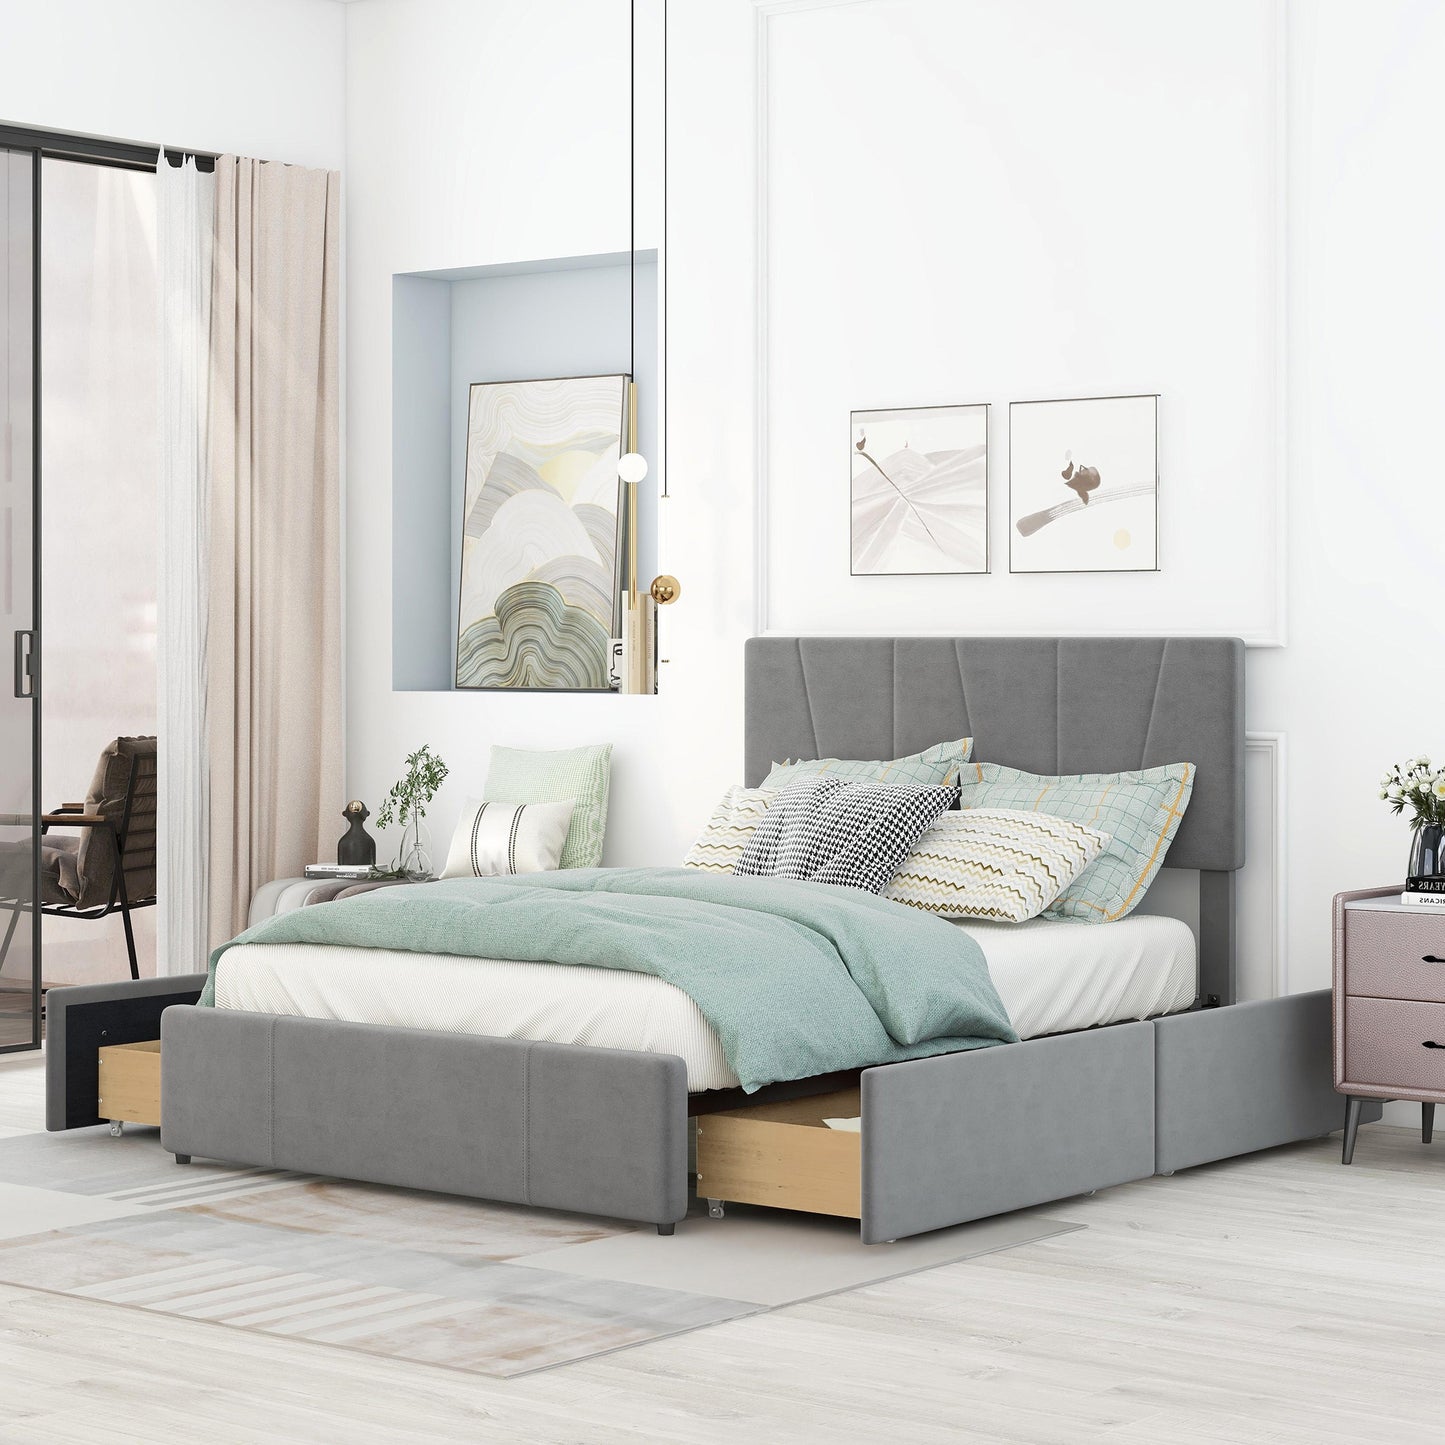 Full Size Upholstery Platform Bed with Four Drawers on Two Sides, Adjustable Headboard, Grey